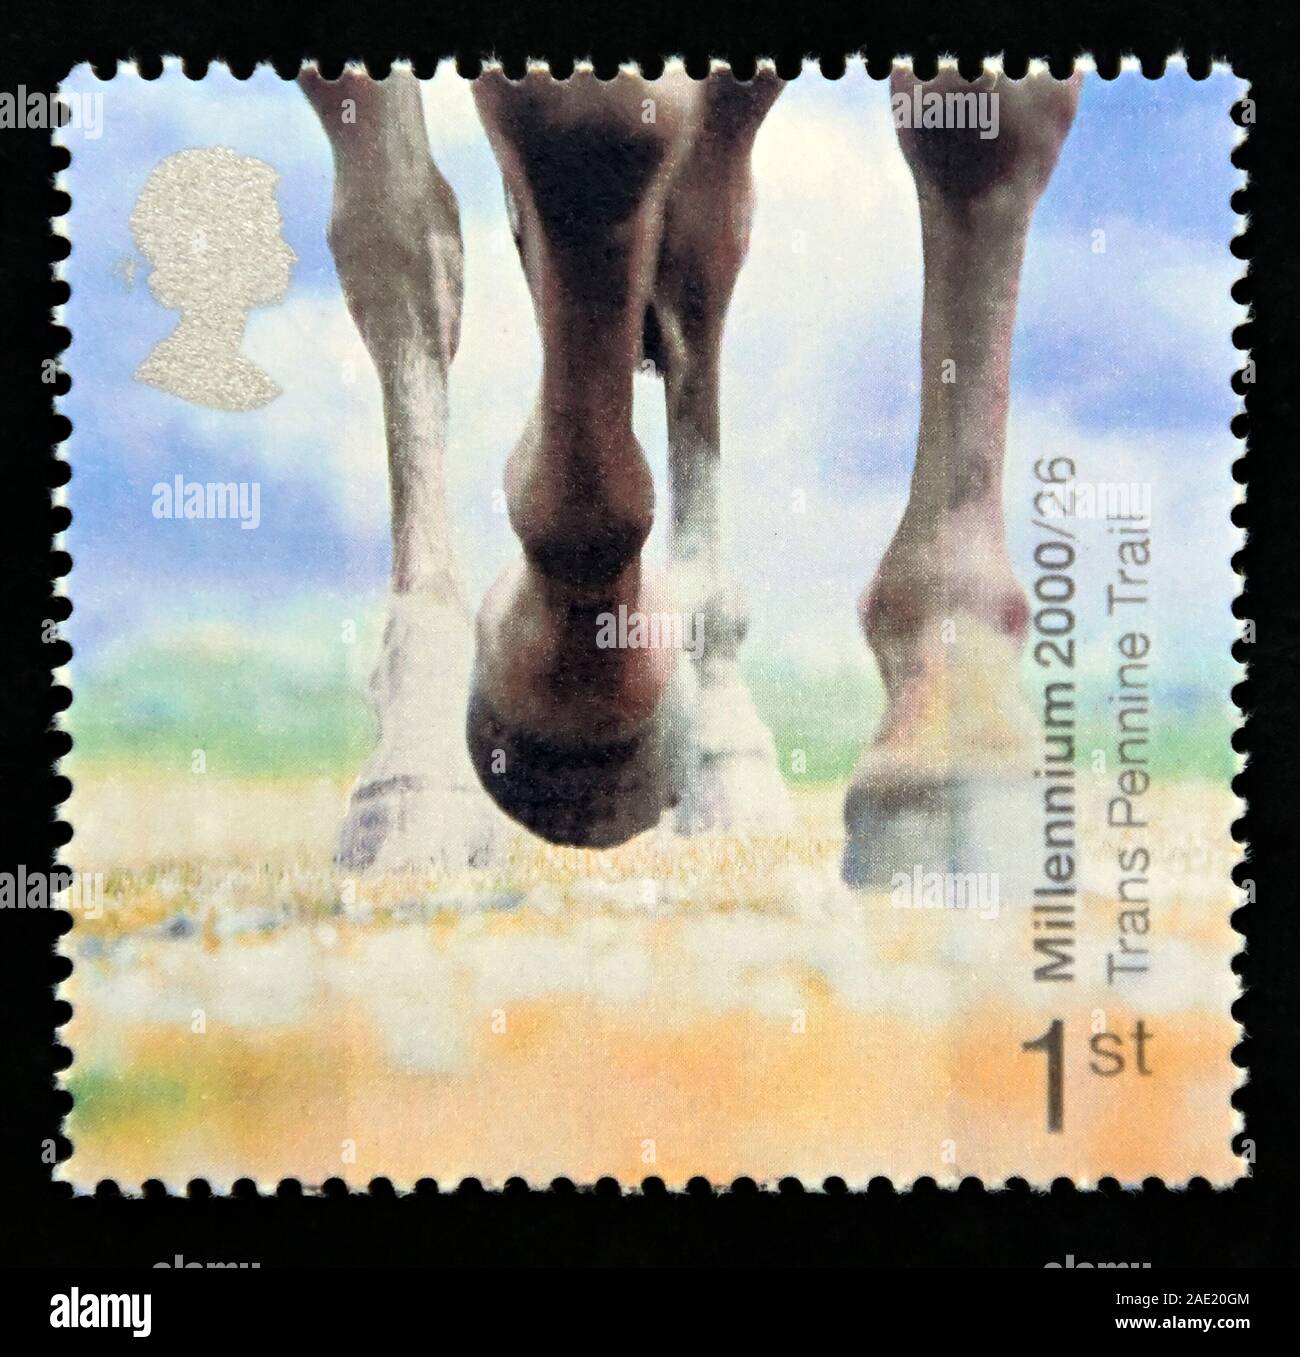 Postage stamp. Great Britain. Queen Elizabeth II. Millenium Projects. 'Stone and Soil'. Horse's Hooves (Trans Pennine Trail, Derbyshire). 1st. Stock Photo